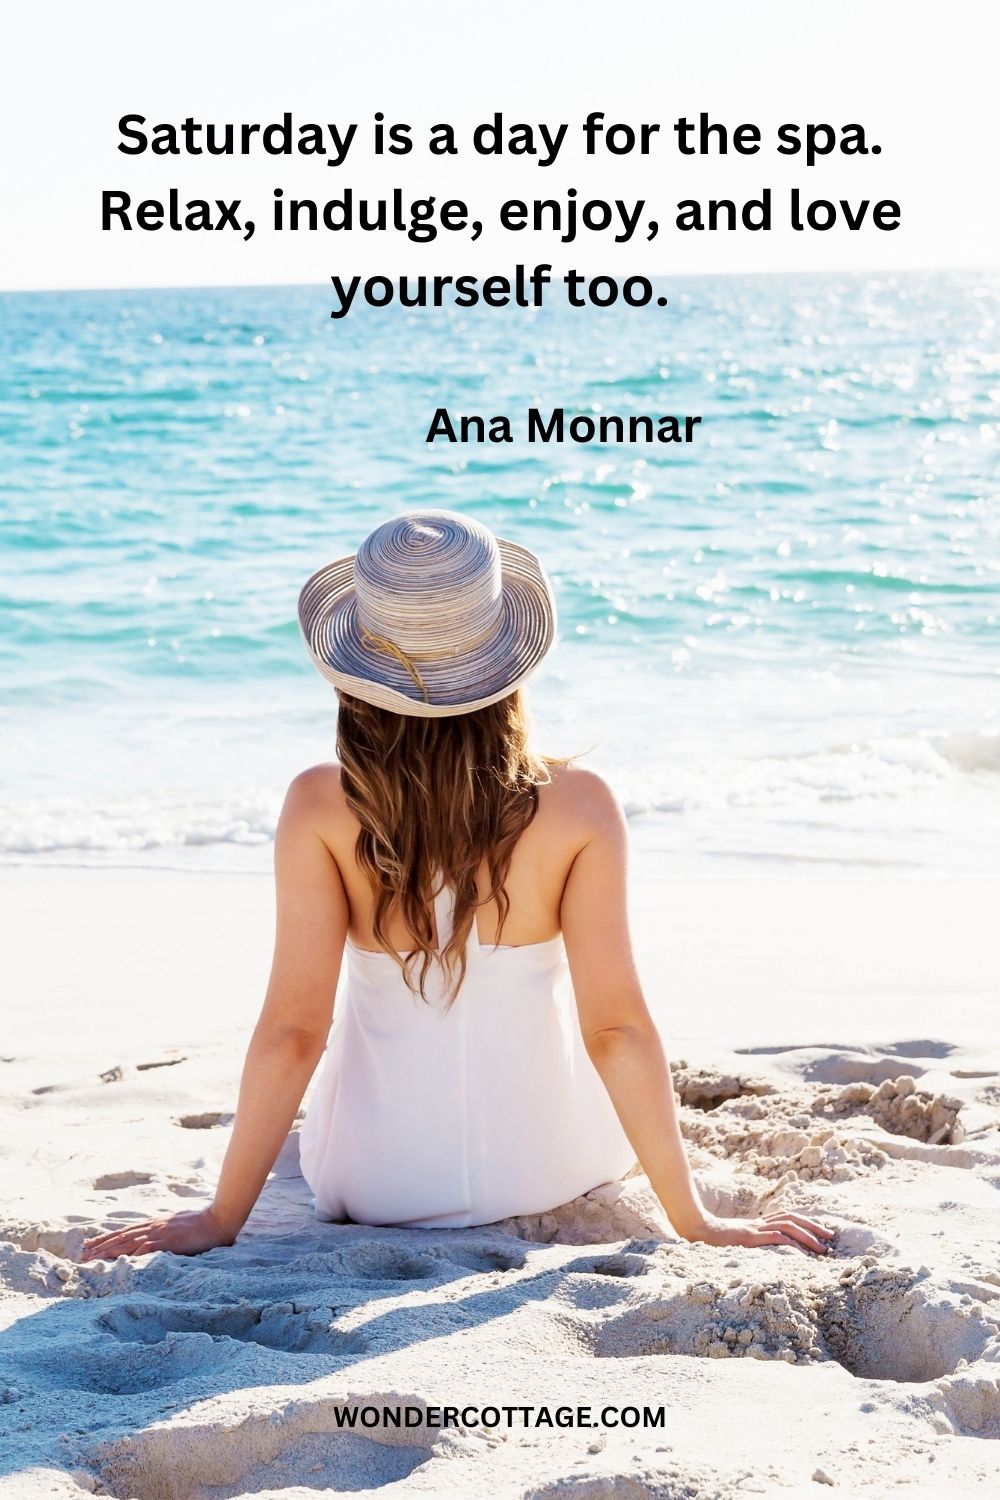 Saturday is a day for the spa. Relax, indulge, enjoy, and love yourself too. Ana Monnar 